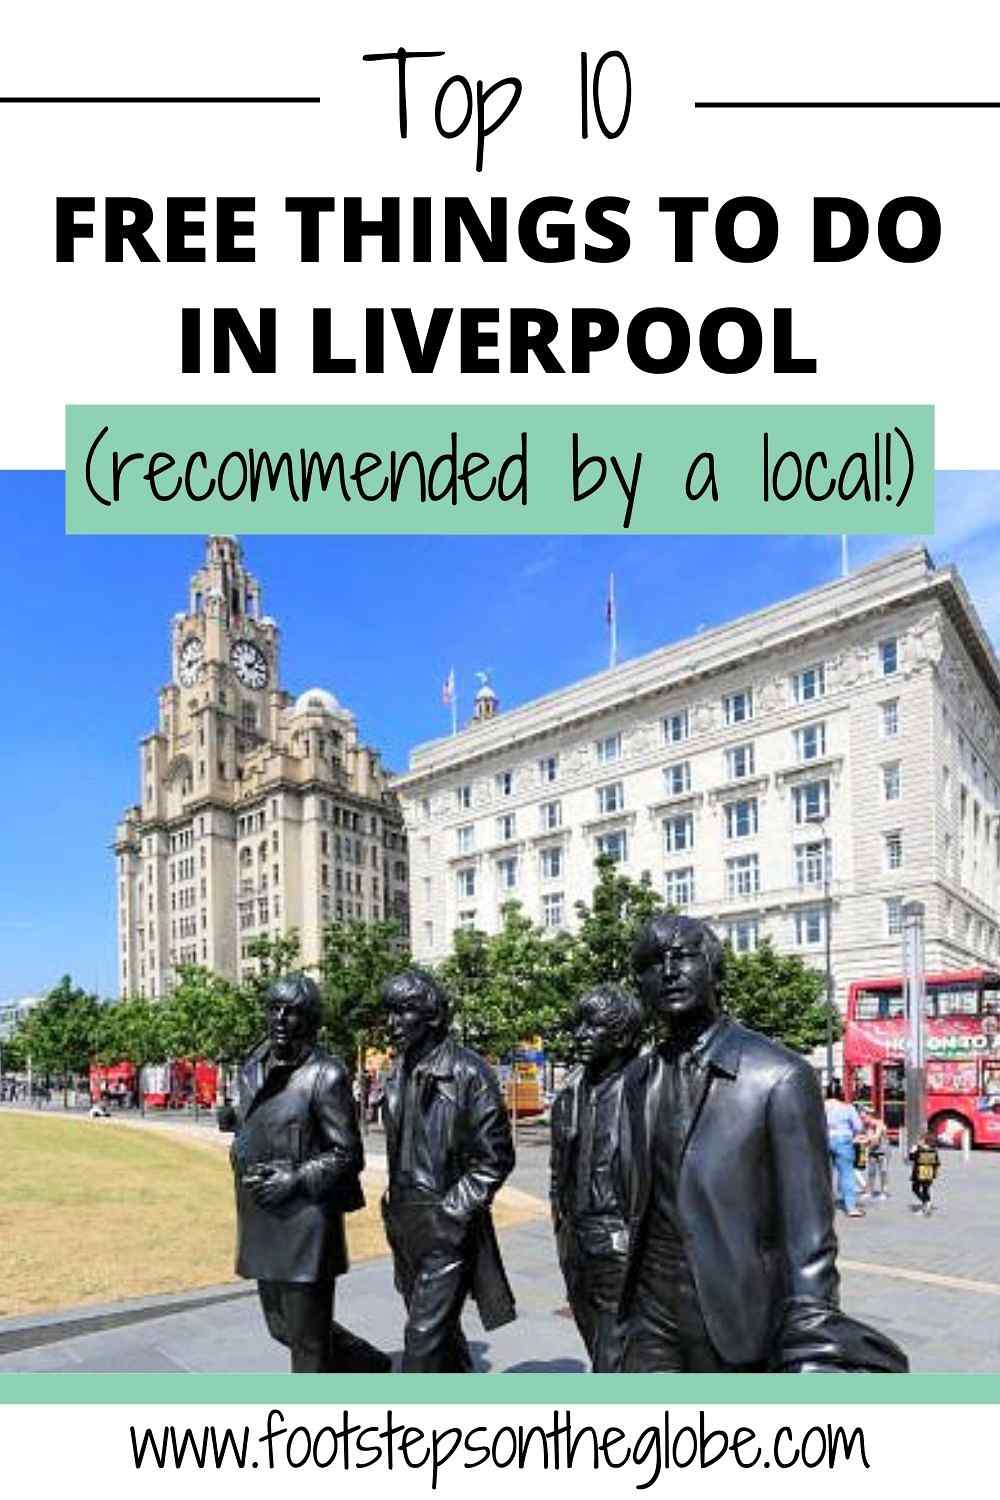 Pinterest image of the Beatles statue in Liverpool with the Liver building in the background and the text: "Top 10 free things to do in Liverpool (recommended by a local!)"